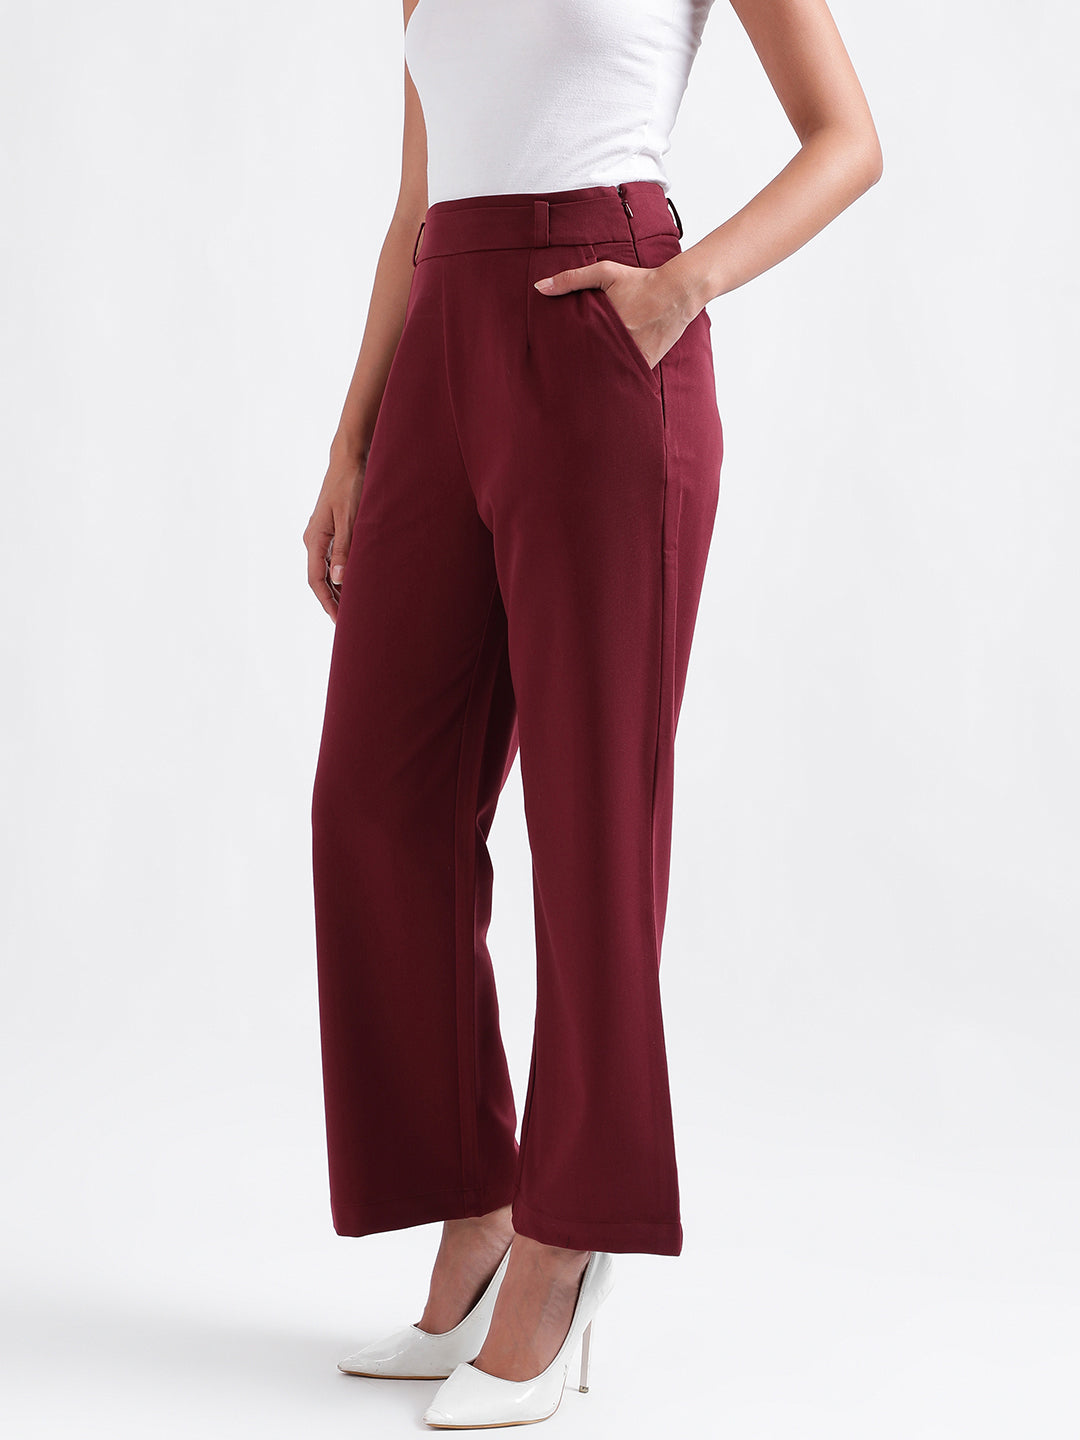 2way maroon Trendy Formal pants for girls and women